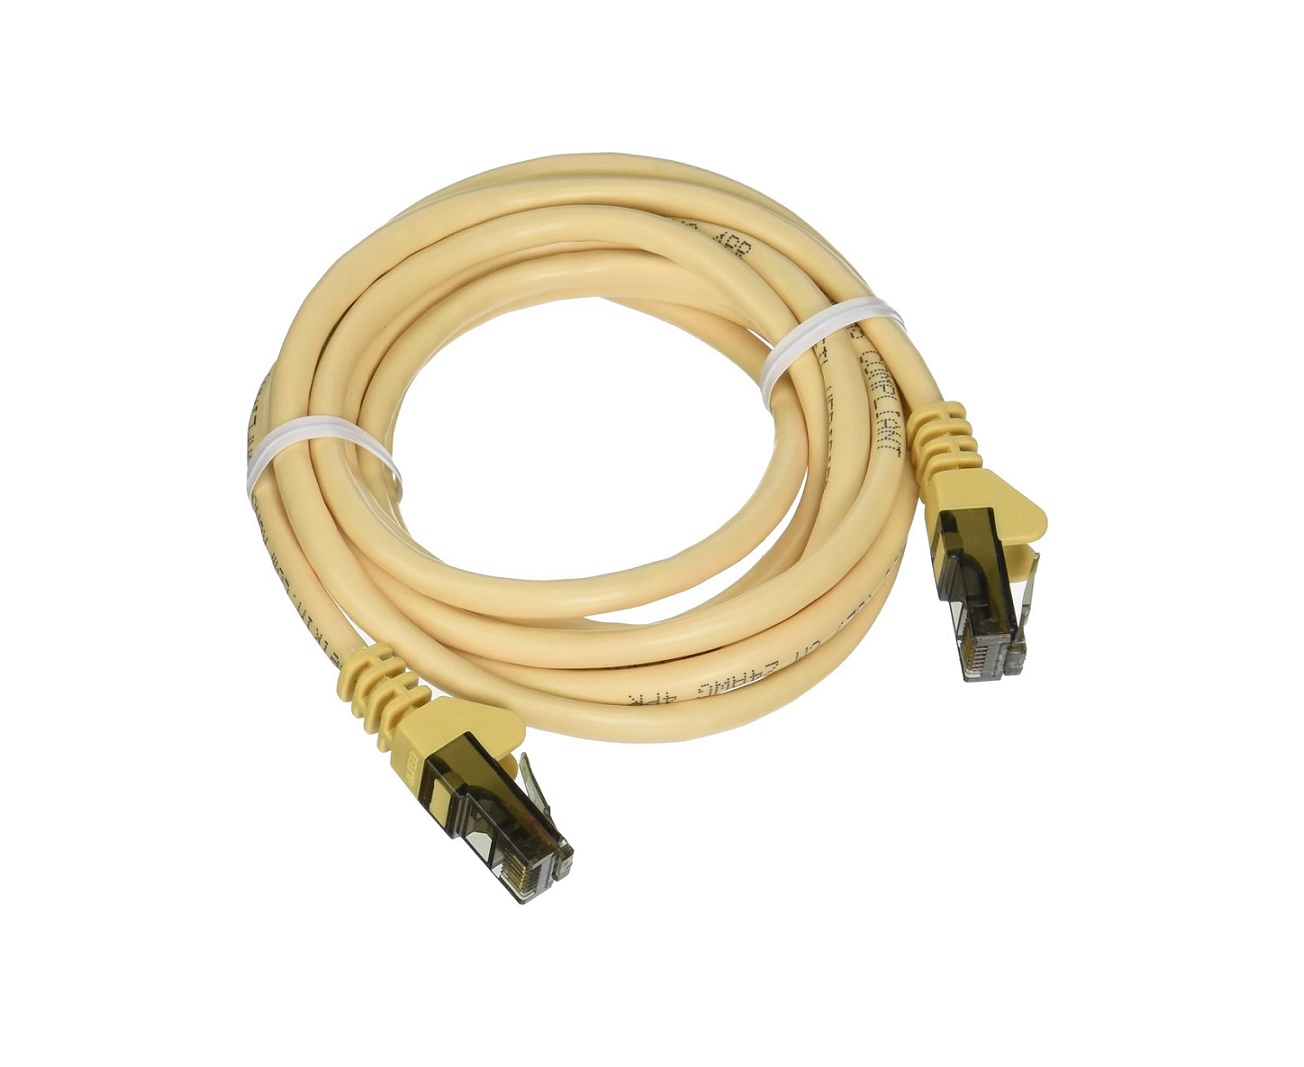 Belkin Snagless CAT6 Patch Cable RJ45M/RJ45M 7 Yellow A3L980-07-YLW-S